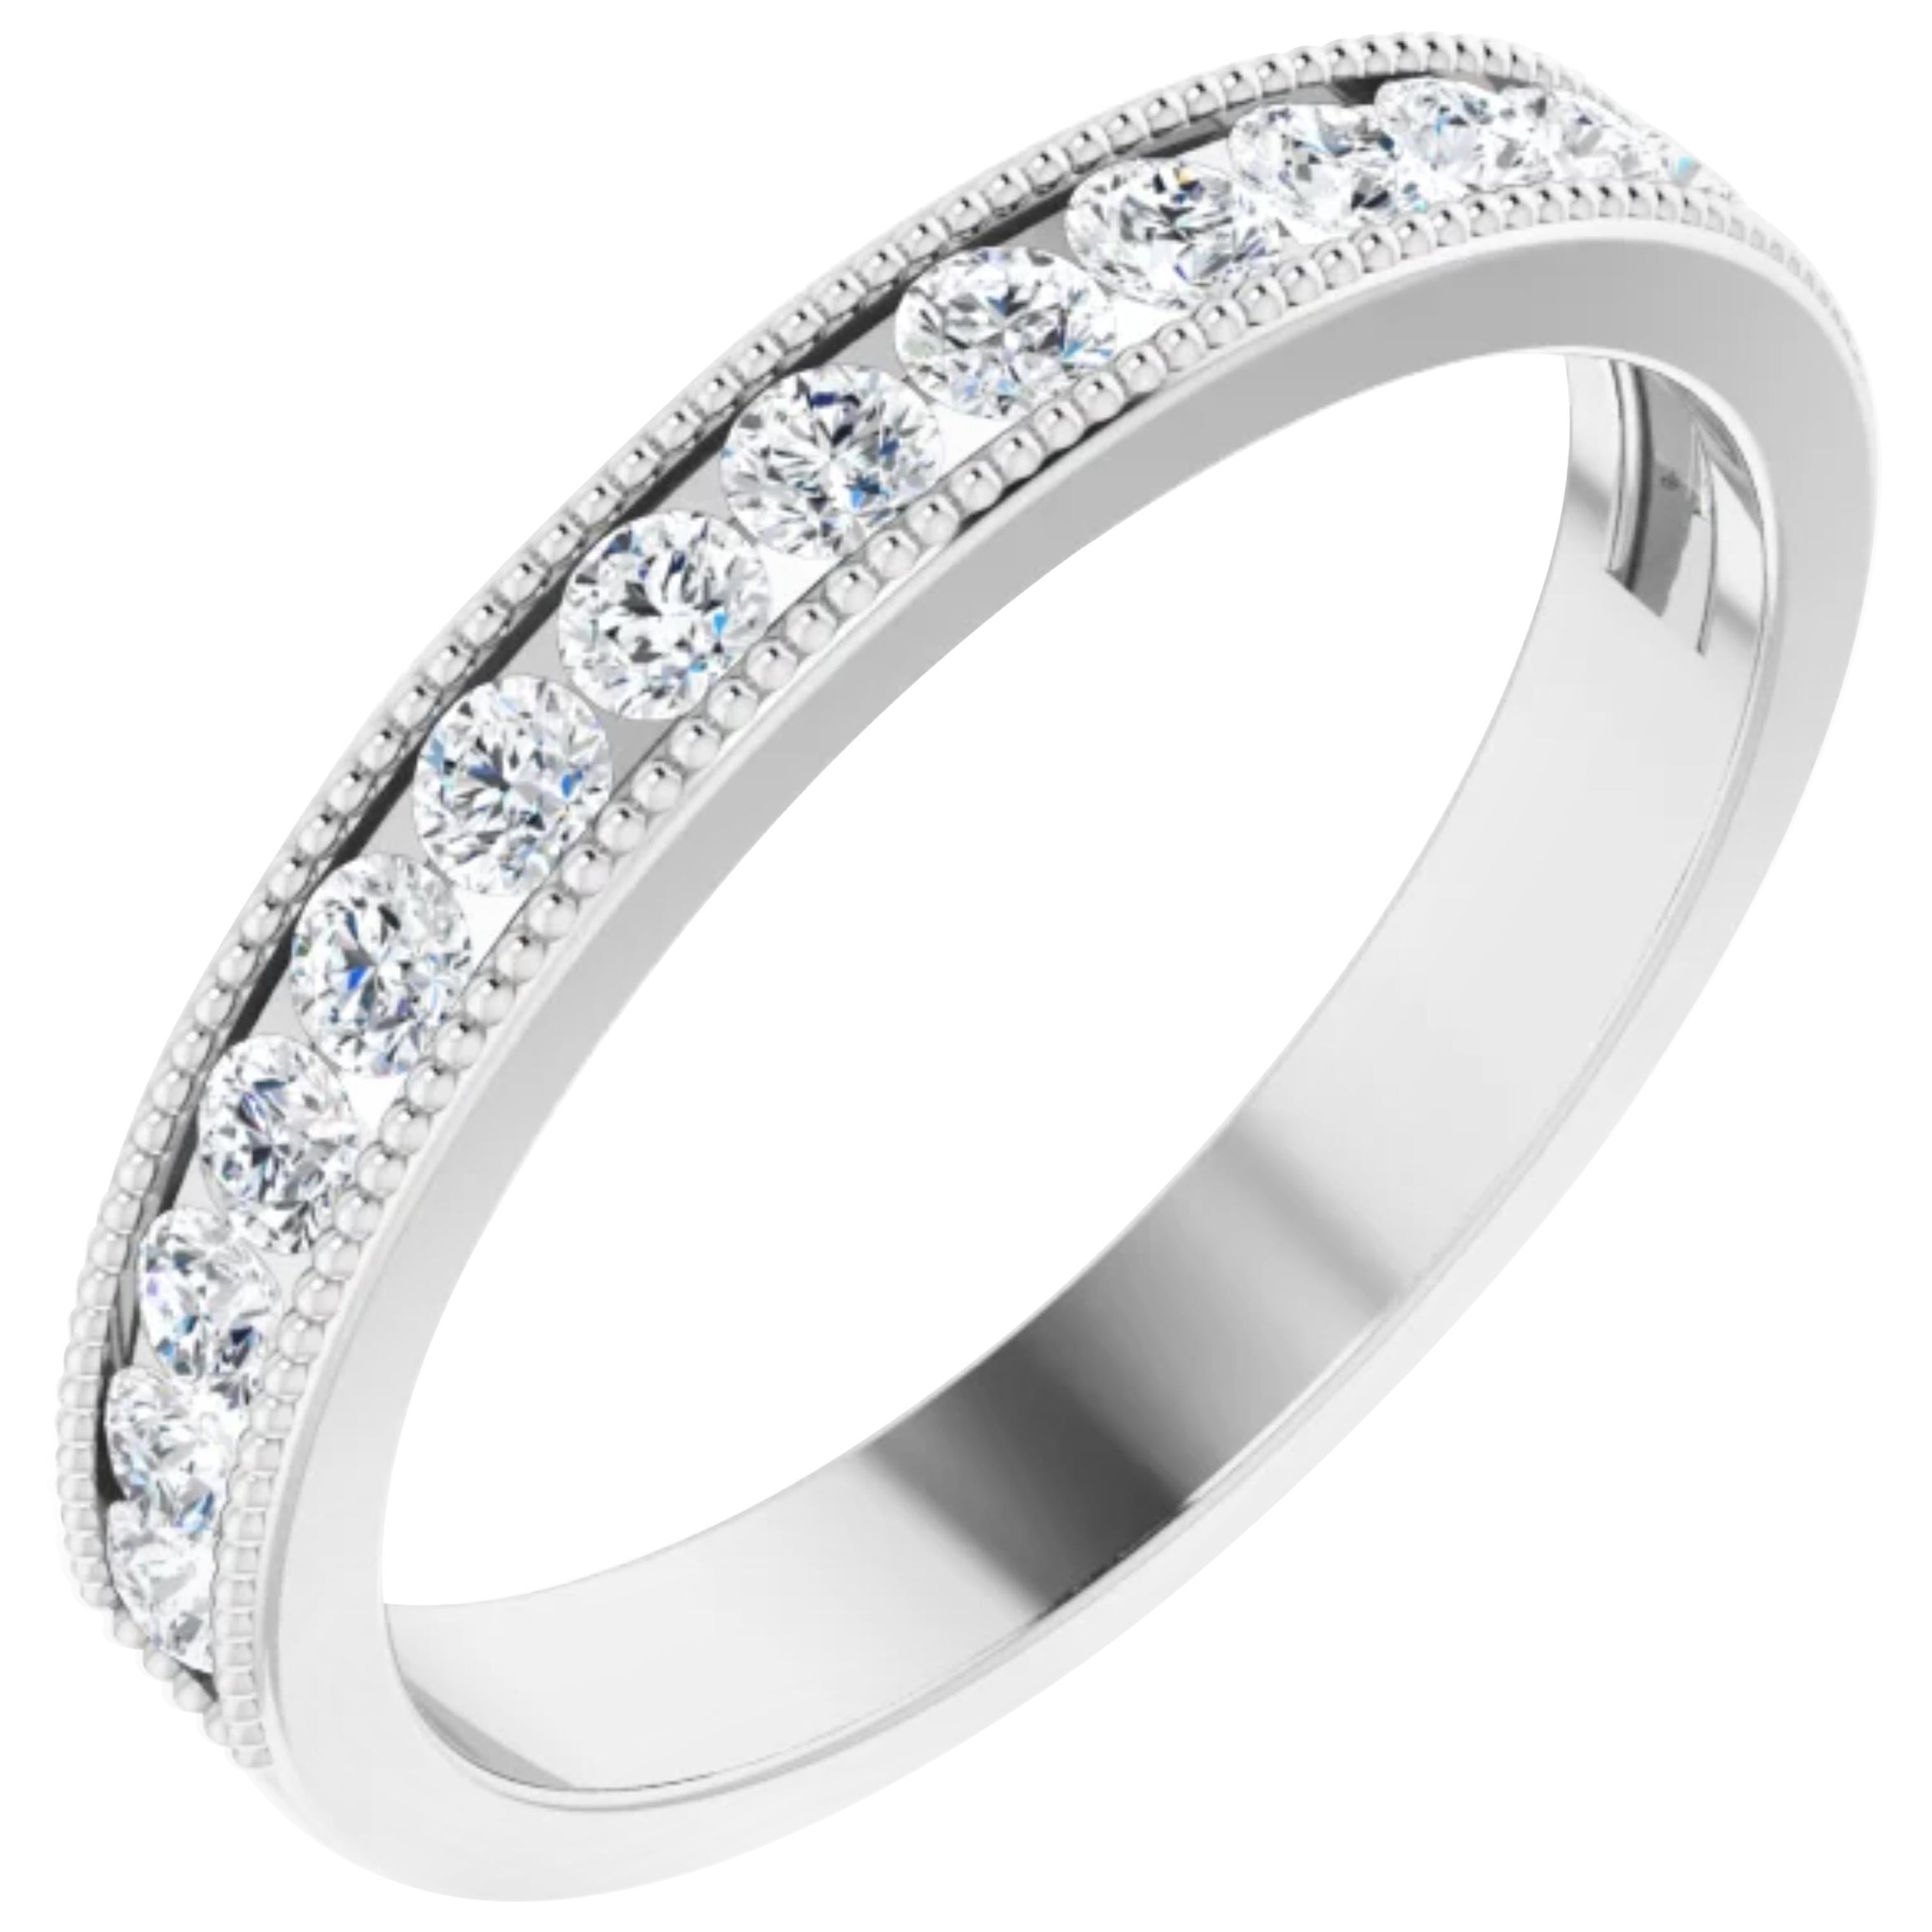 Vintage Style Diamond Wedding Ring Anniversary Band 18k White Gold 0.52 Carat For Sale